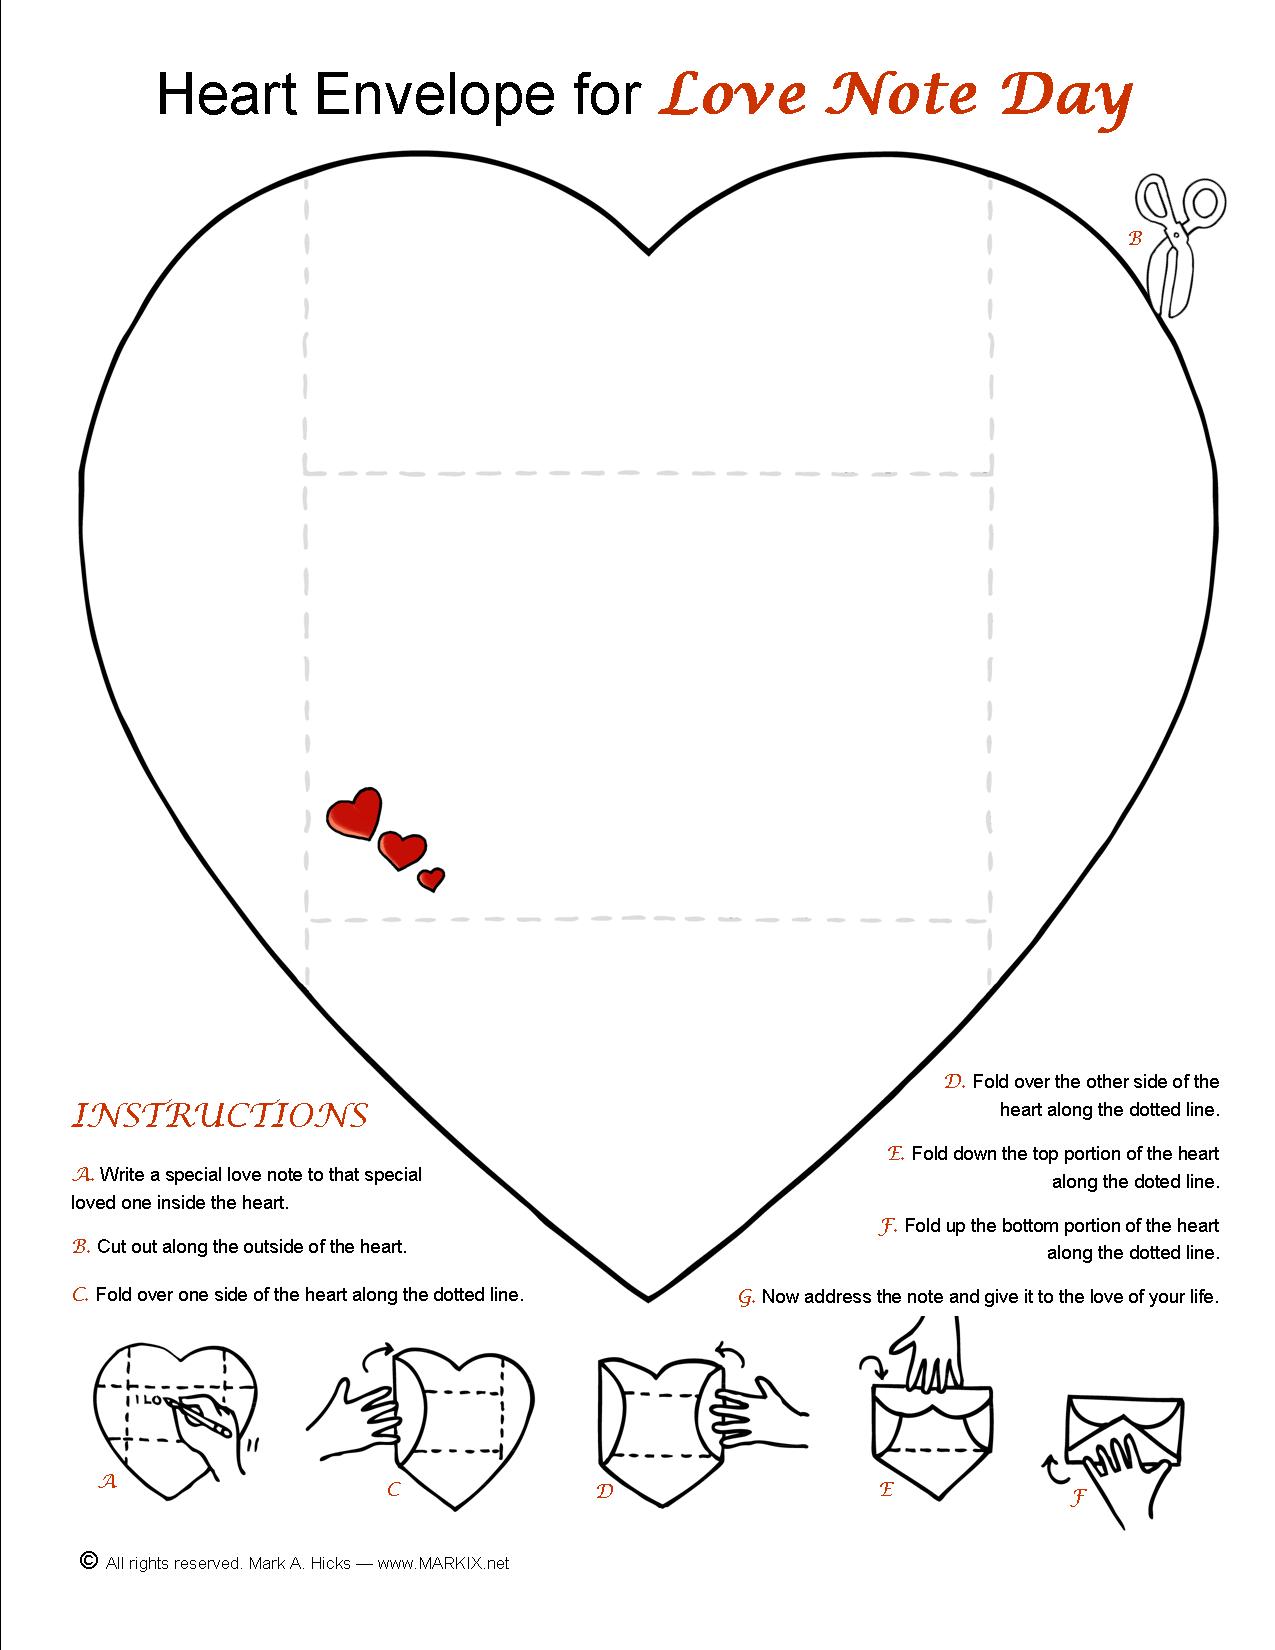 Heart Note and Envelope to print out and fold